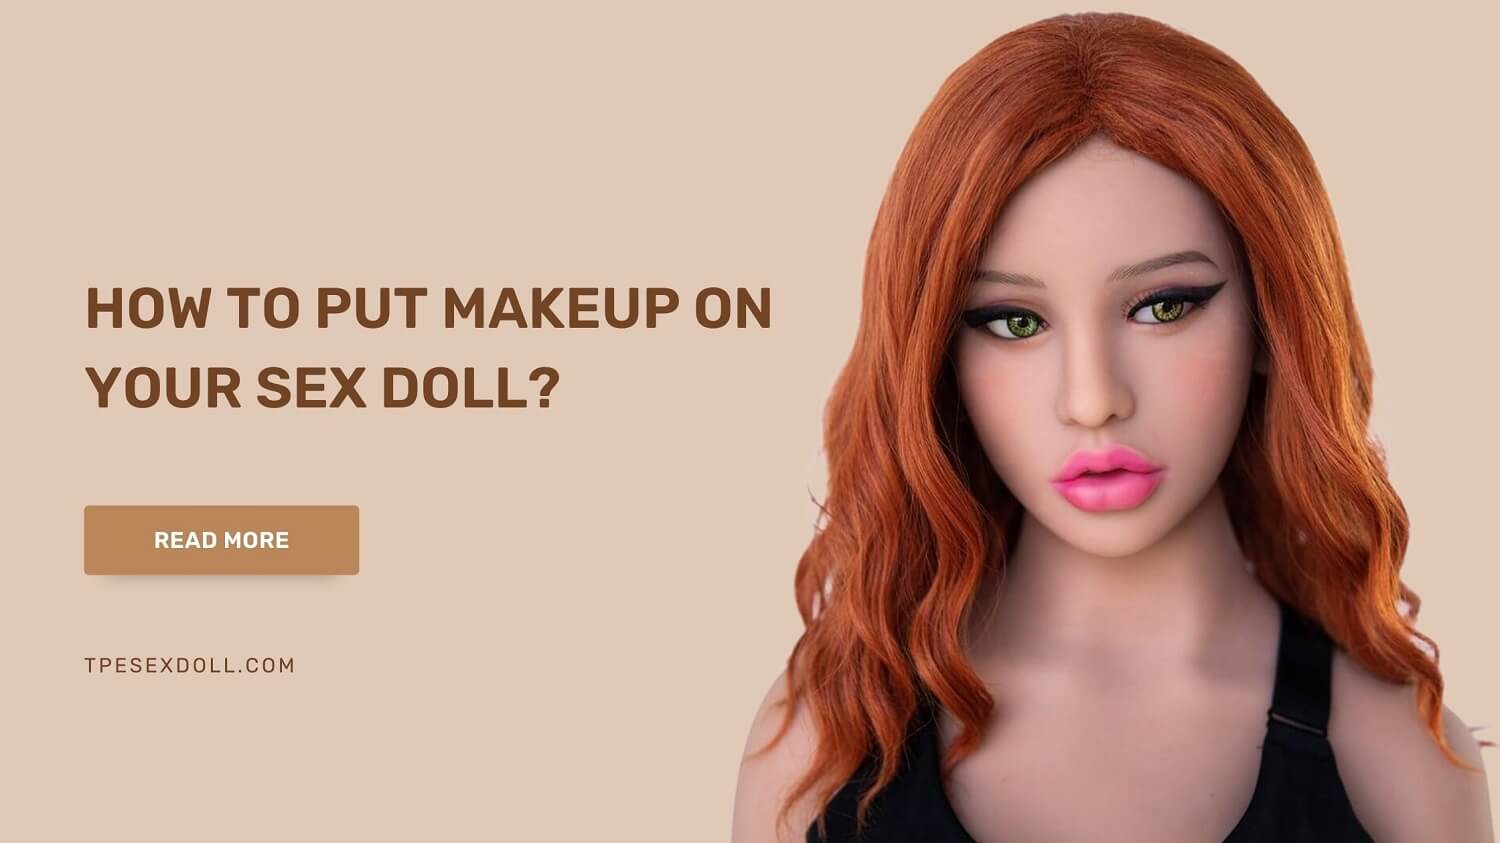 put makeup on your sex doll | TPESEXDOLL